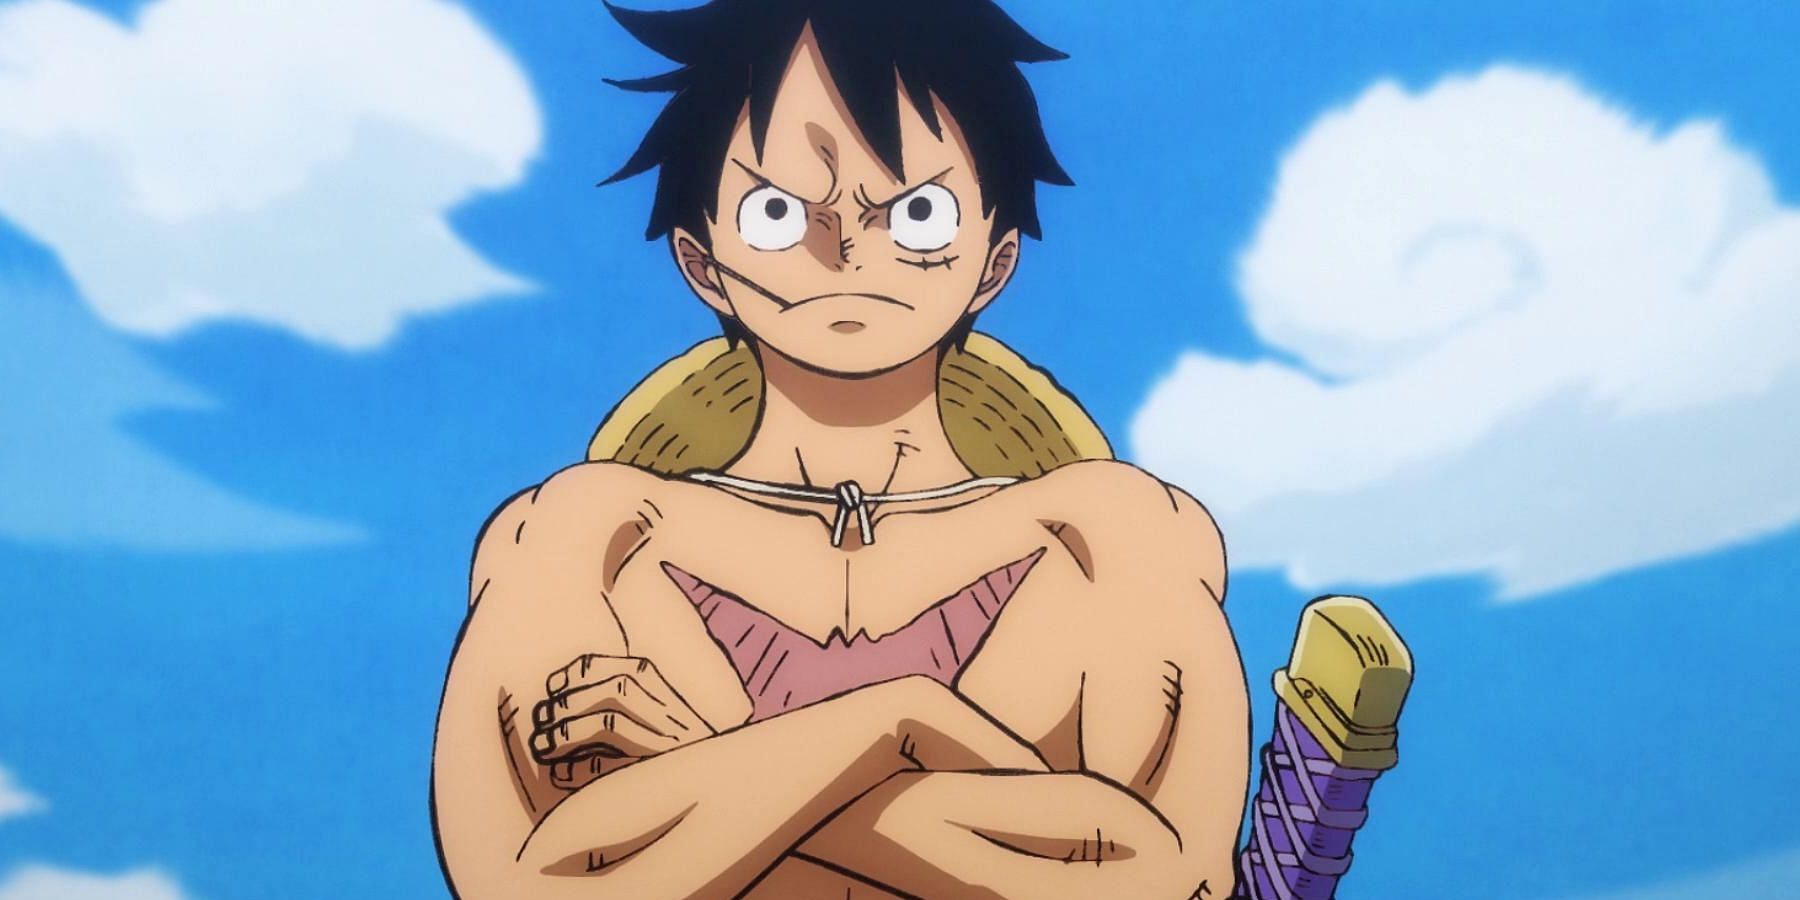 A buff Monkey D Luffy from One Piece.